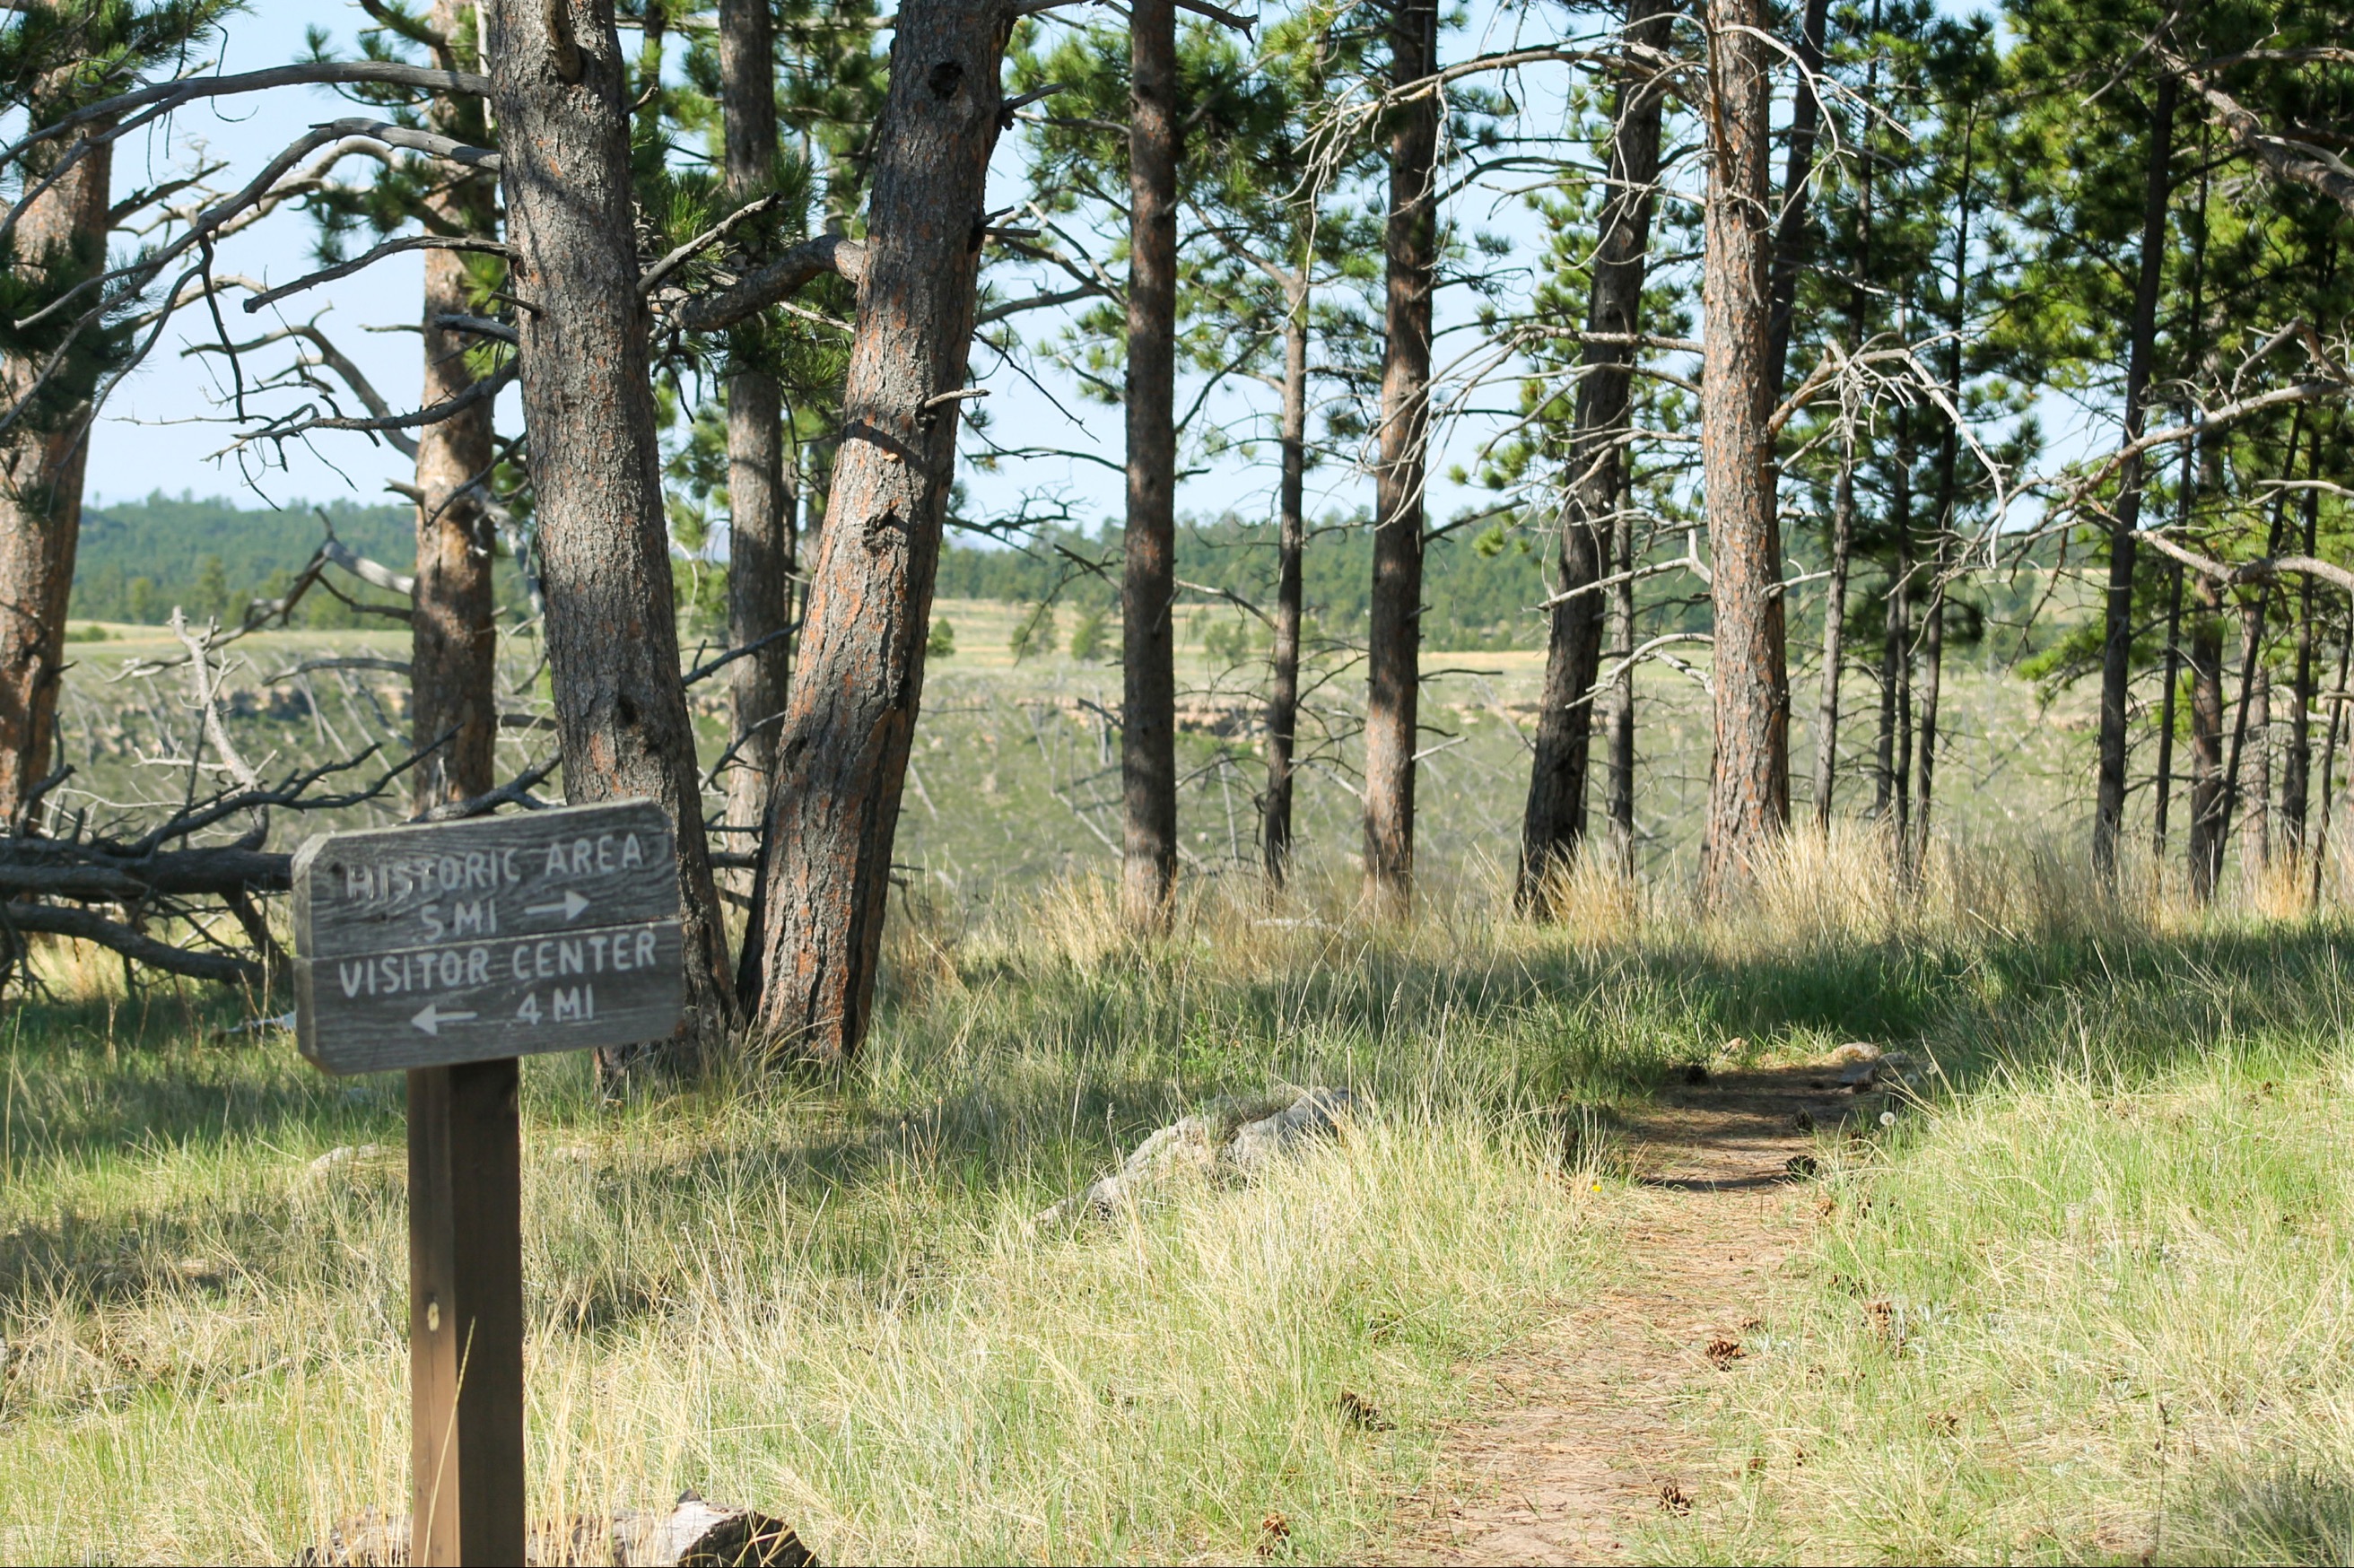 A brown trail sign with distances to the Historic Area and Visitor Center, showing a worn path in the background.